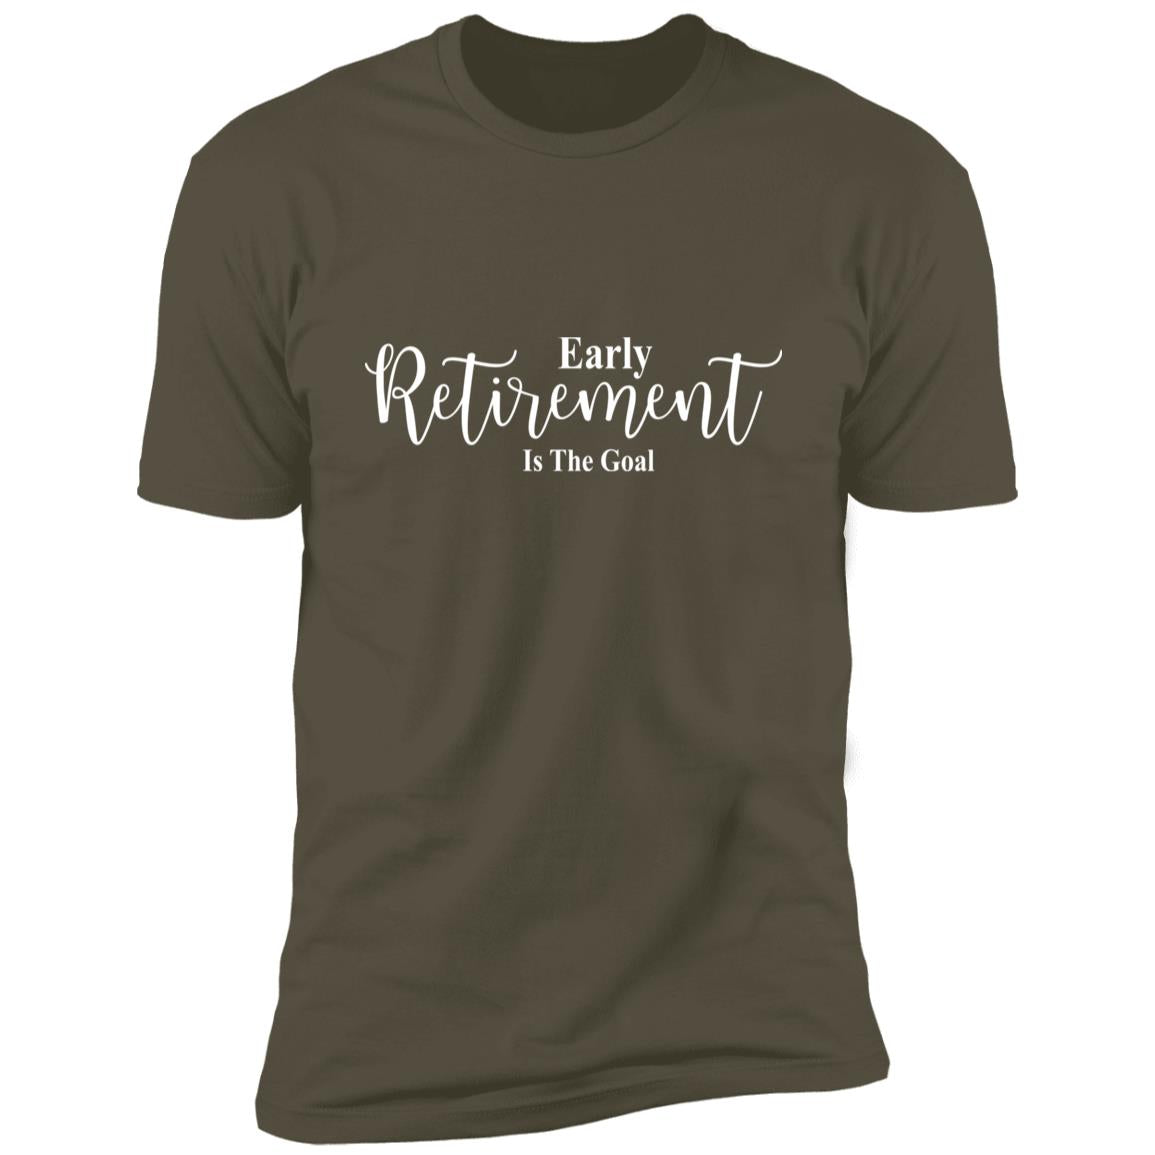 Early Retirement Is The Goal - Premium Short Sleeve T-Shirt